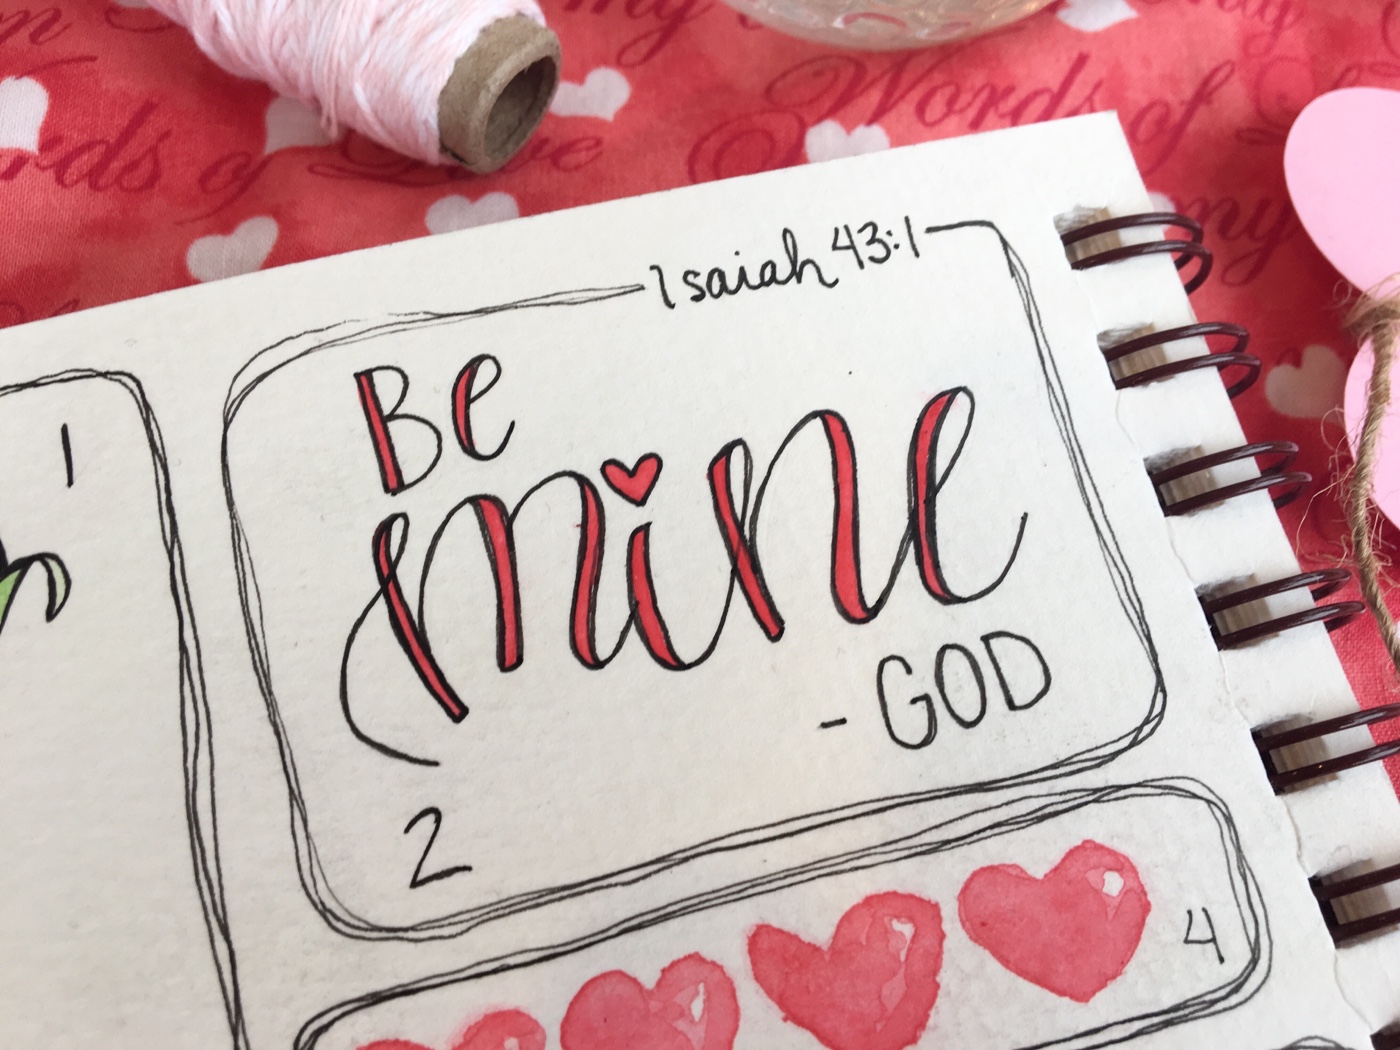 A love note from God - hand lettered February prompt